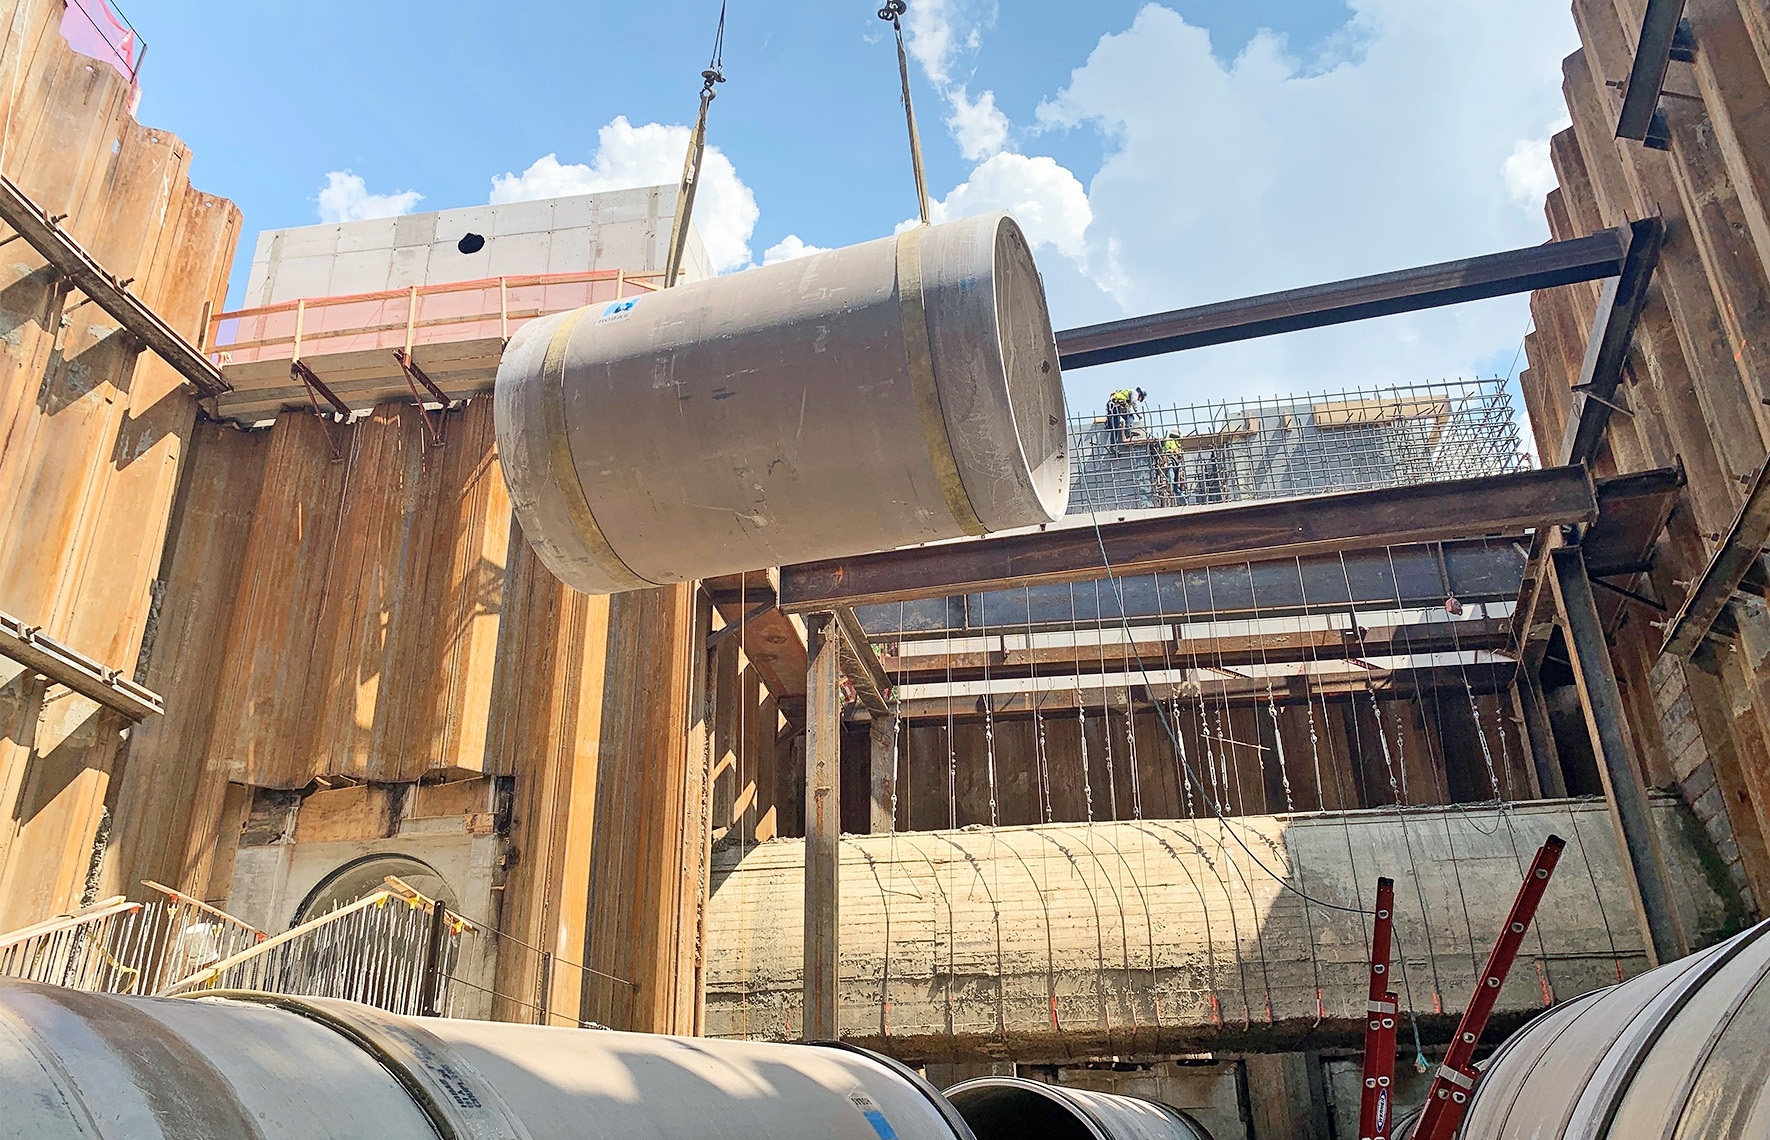 Here, our team is lowering a tie-in section of 84" Hobas pipe into place on the Mill Creek HRT Diversion Chamber Design-Build. These pipes transfer sewage flow from the new Connector Boxes in the background of the image to the Diversion Chamber.